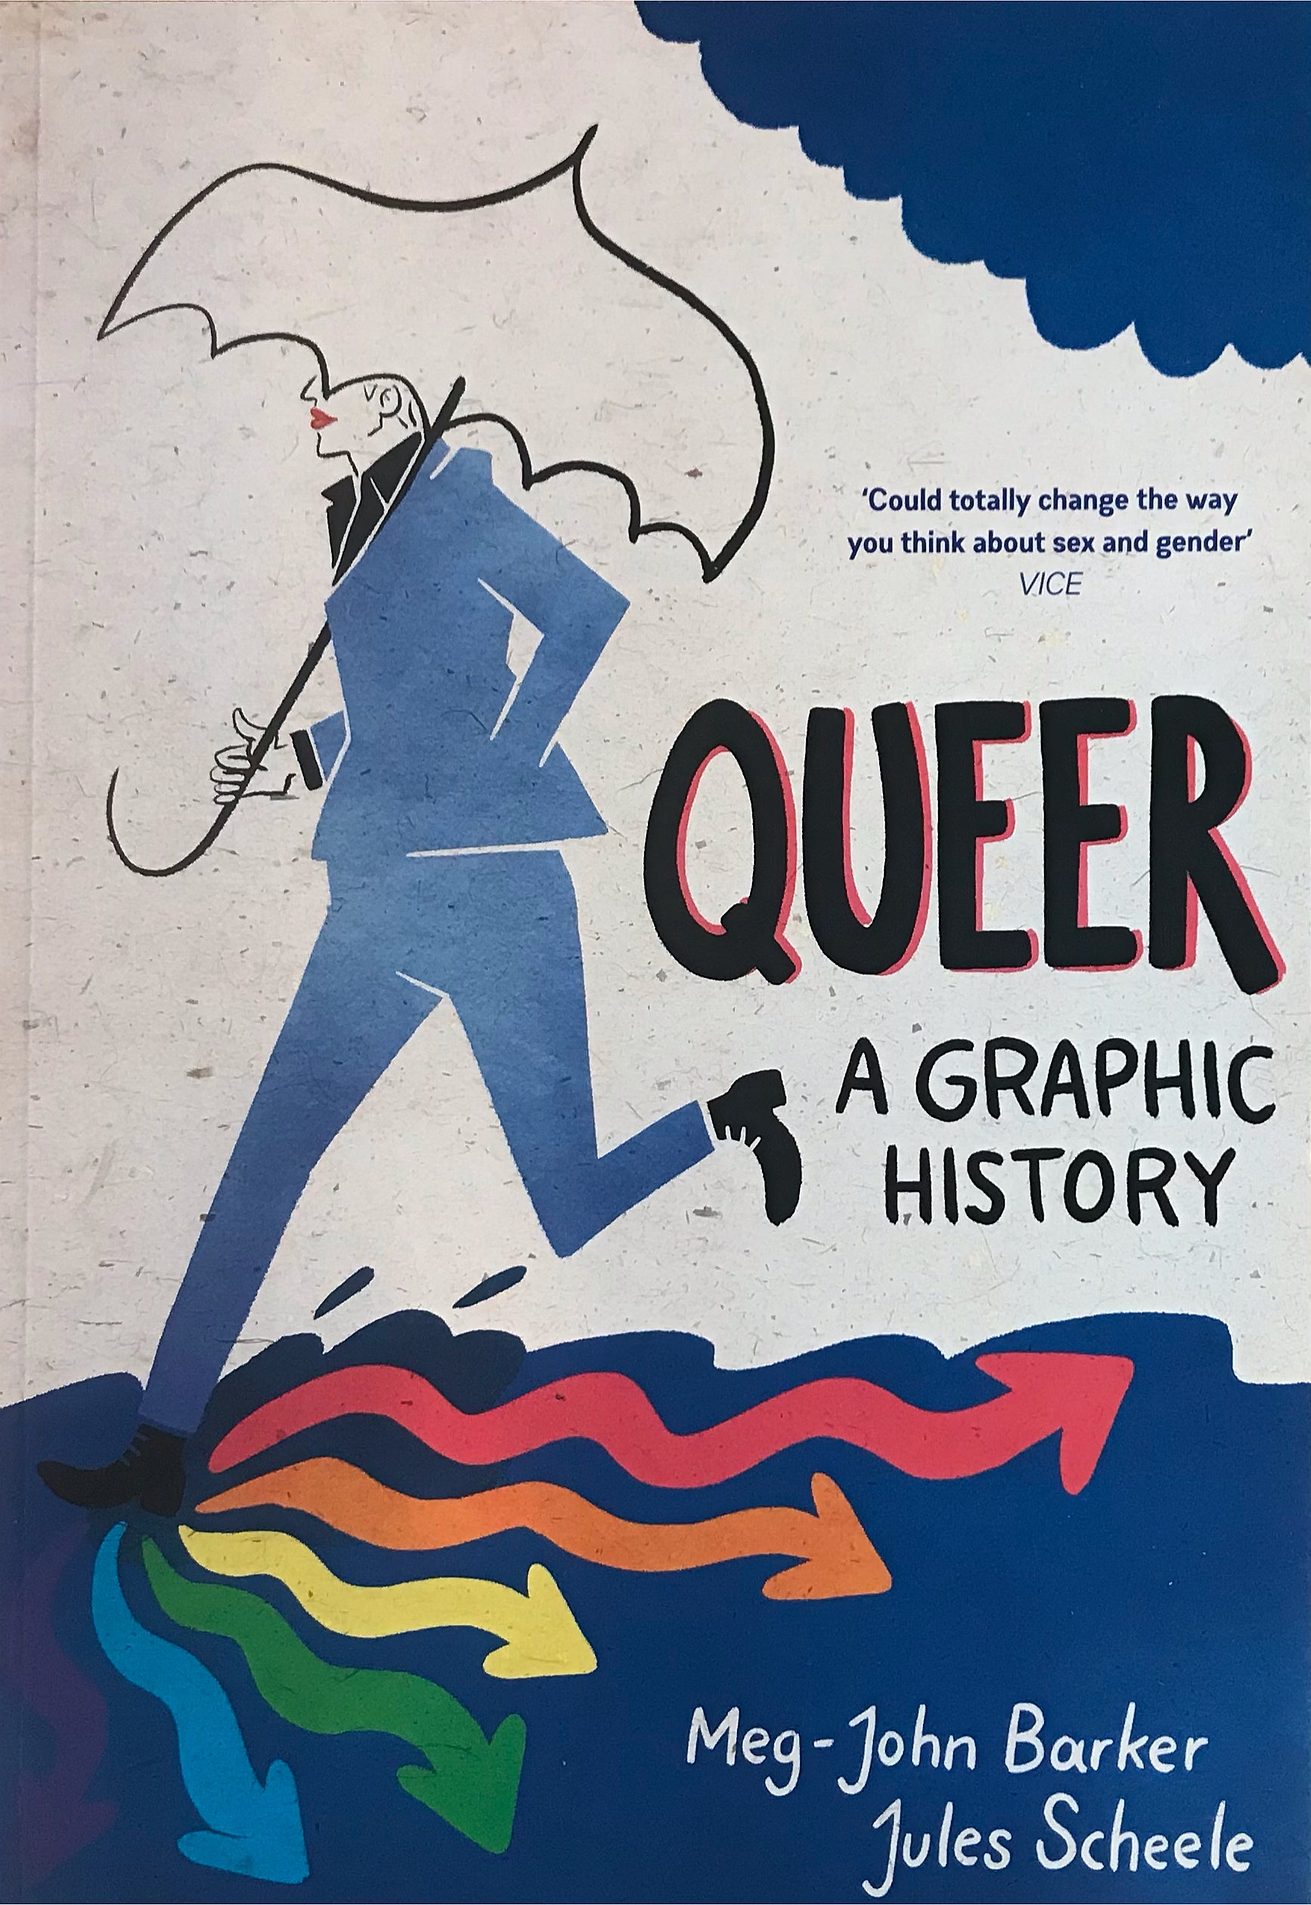 Queer: A Graphic History book cover